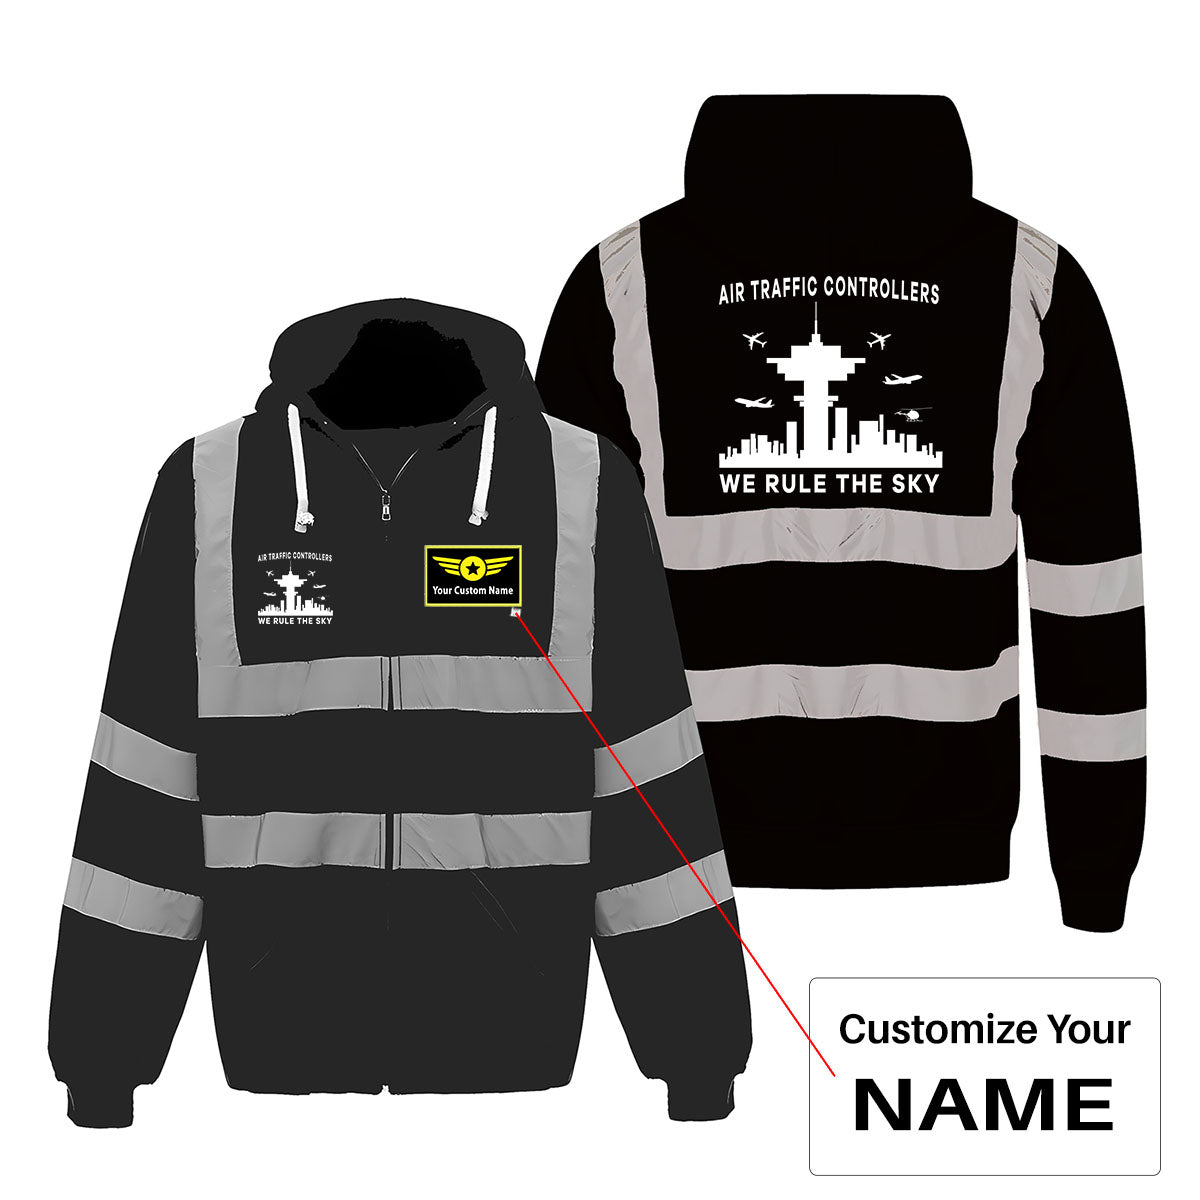 Air Traffic Controllers - We Rule The Sky Designed Reflective Zipped Hoodies